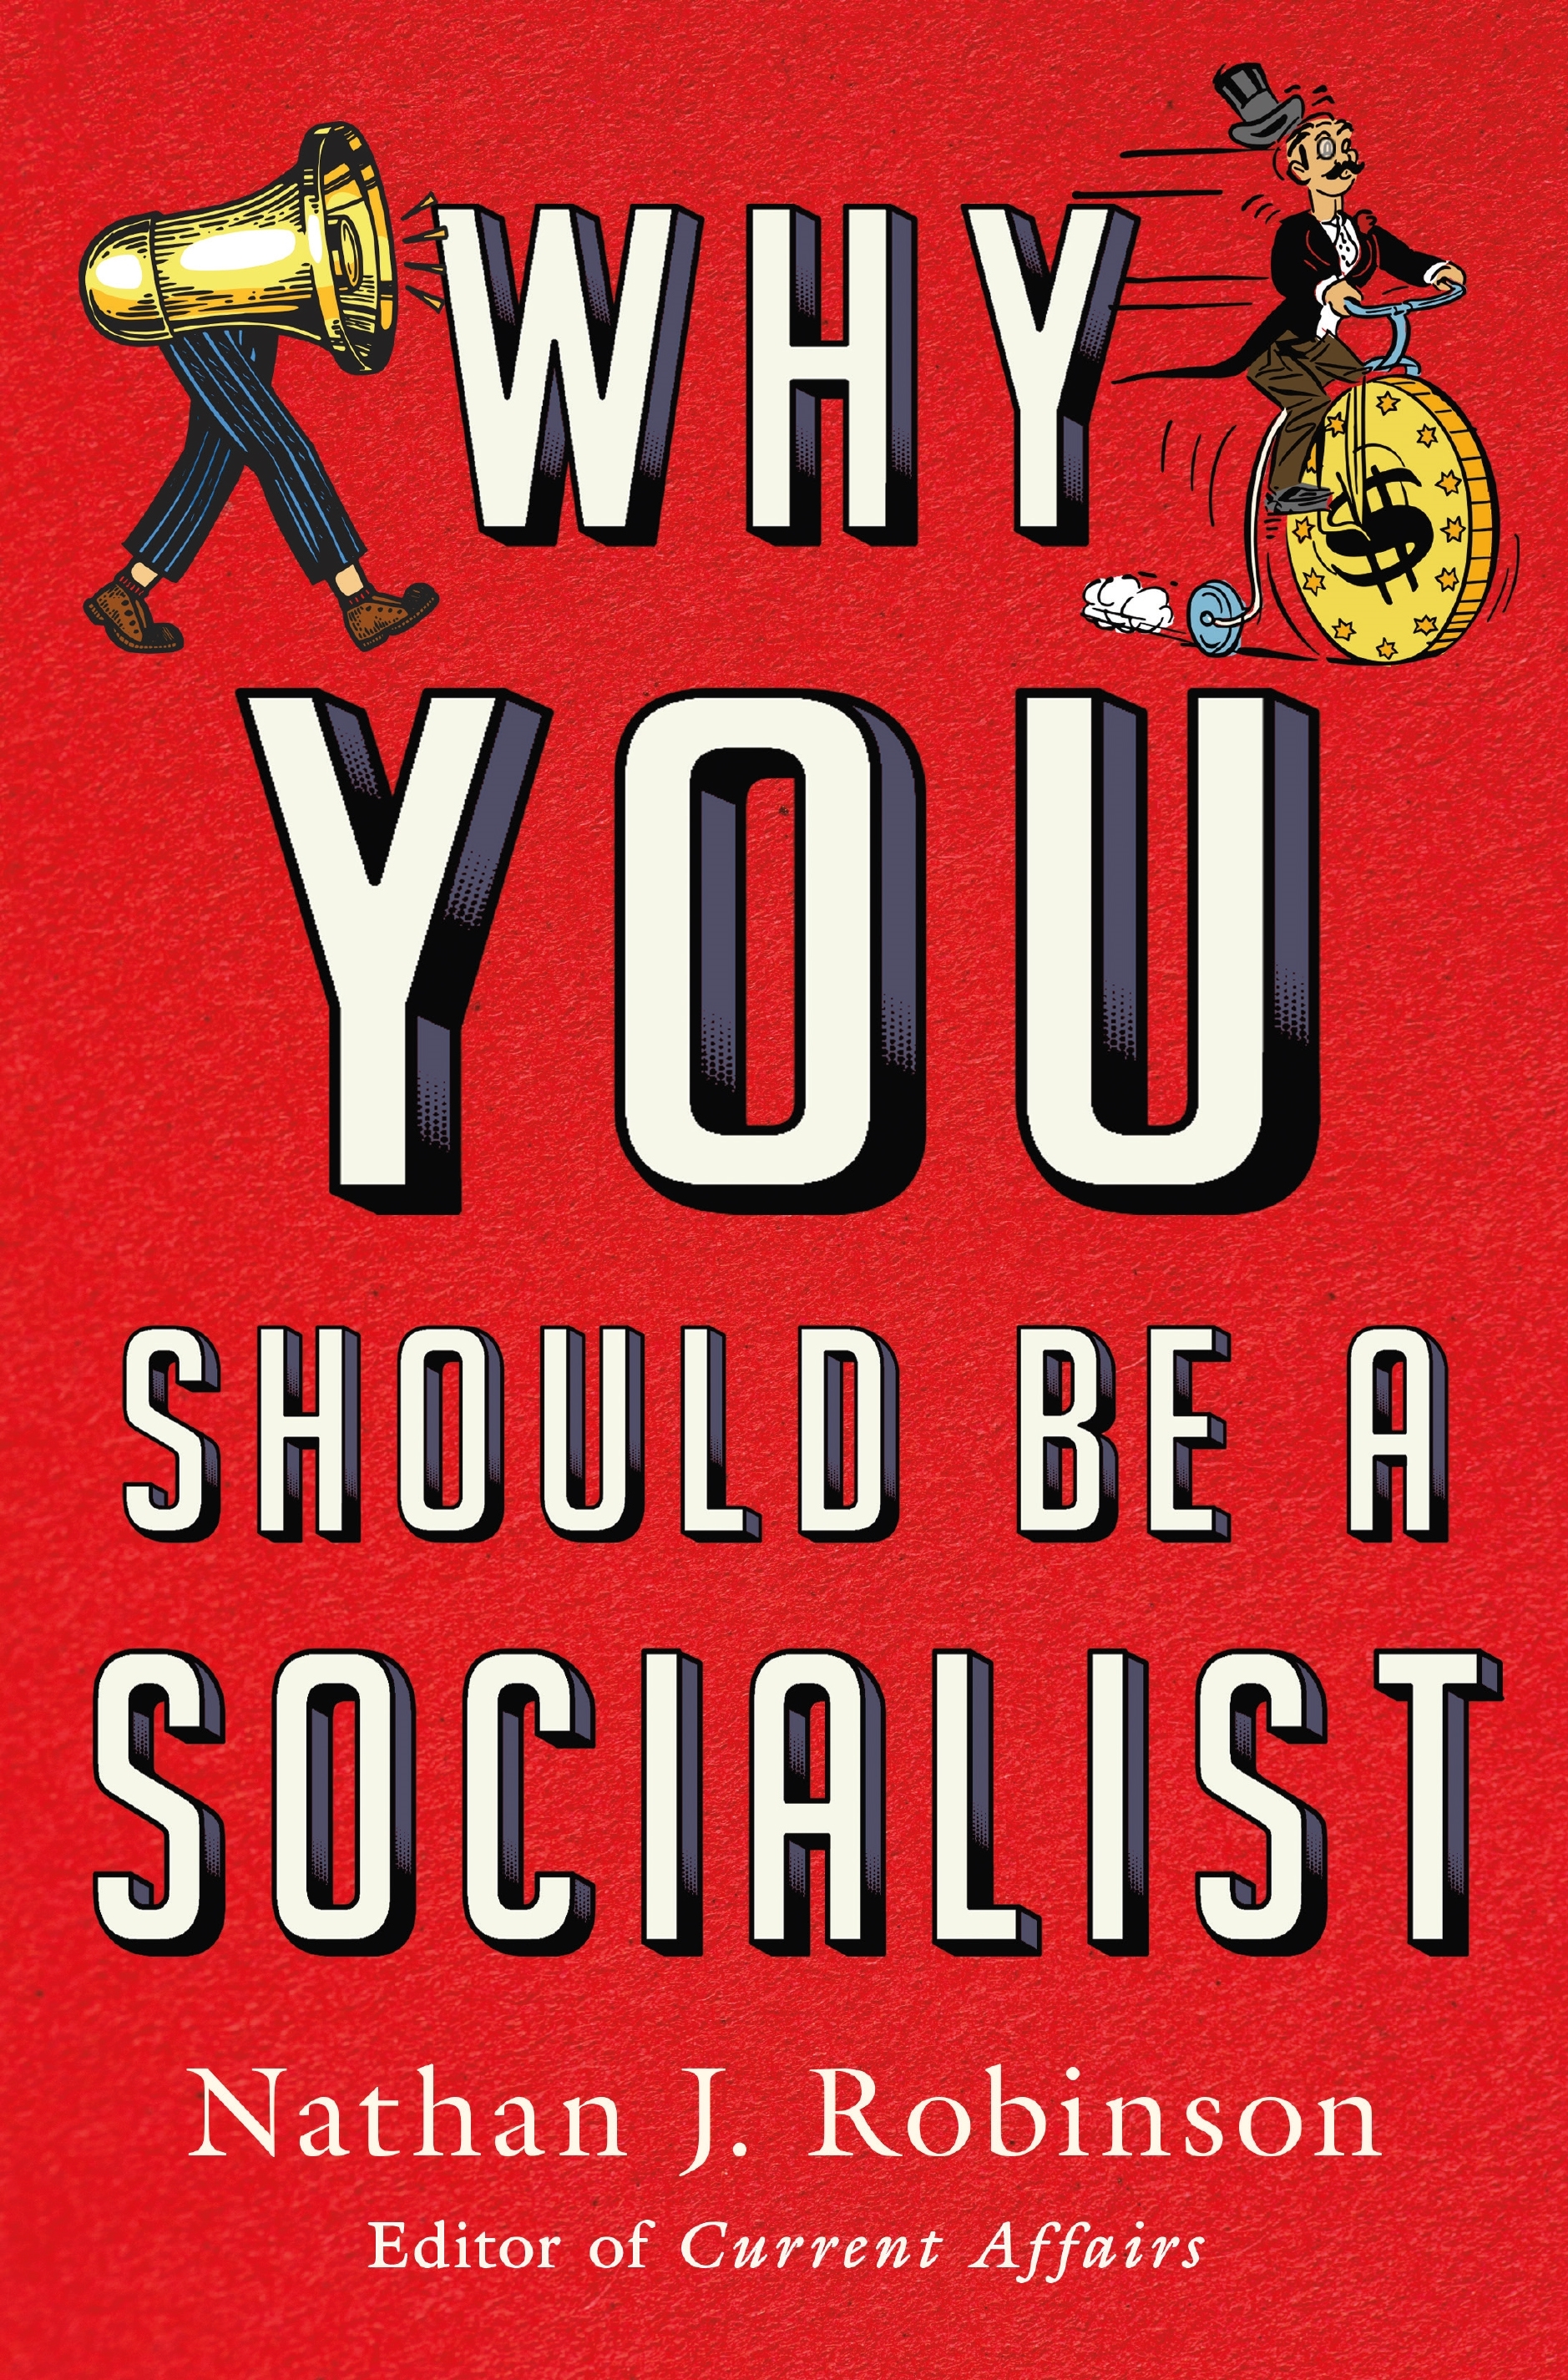 Book Launch: Why You Should Be A Socialist by Nathan J. Robinson in conversation with Timothy Faust